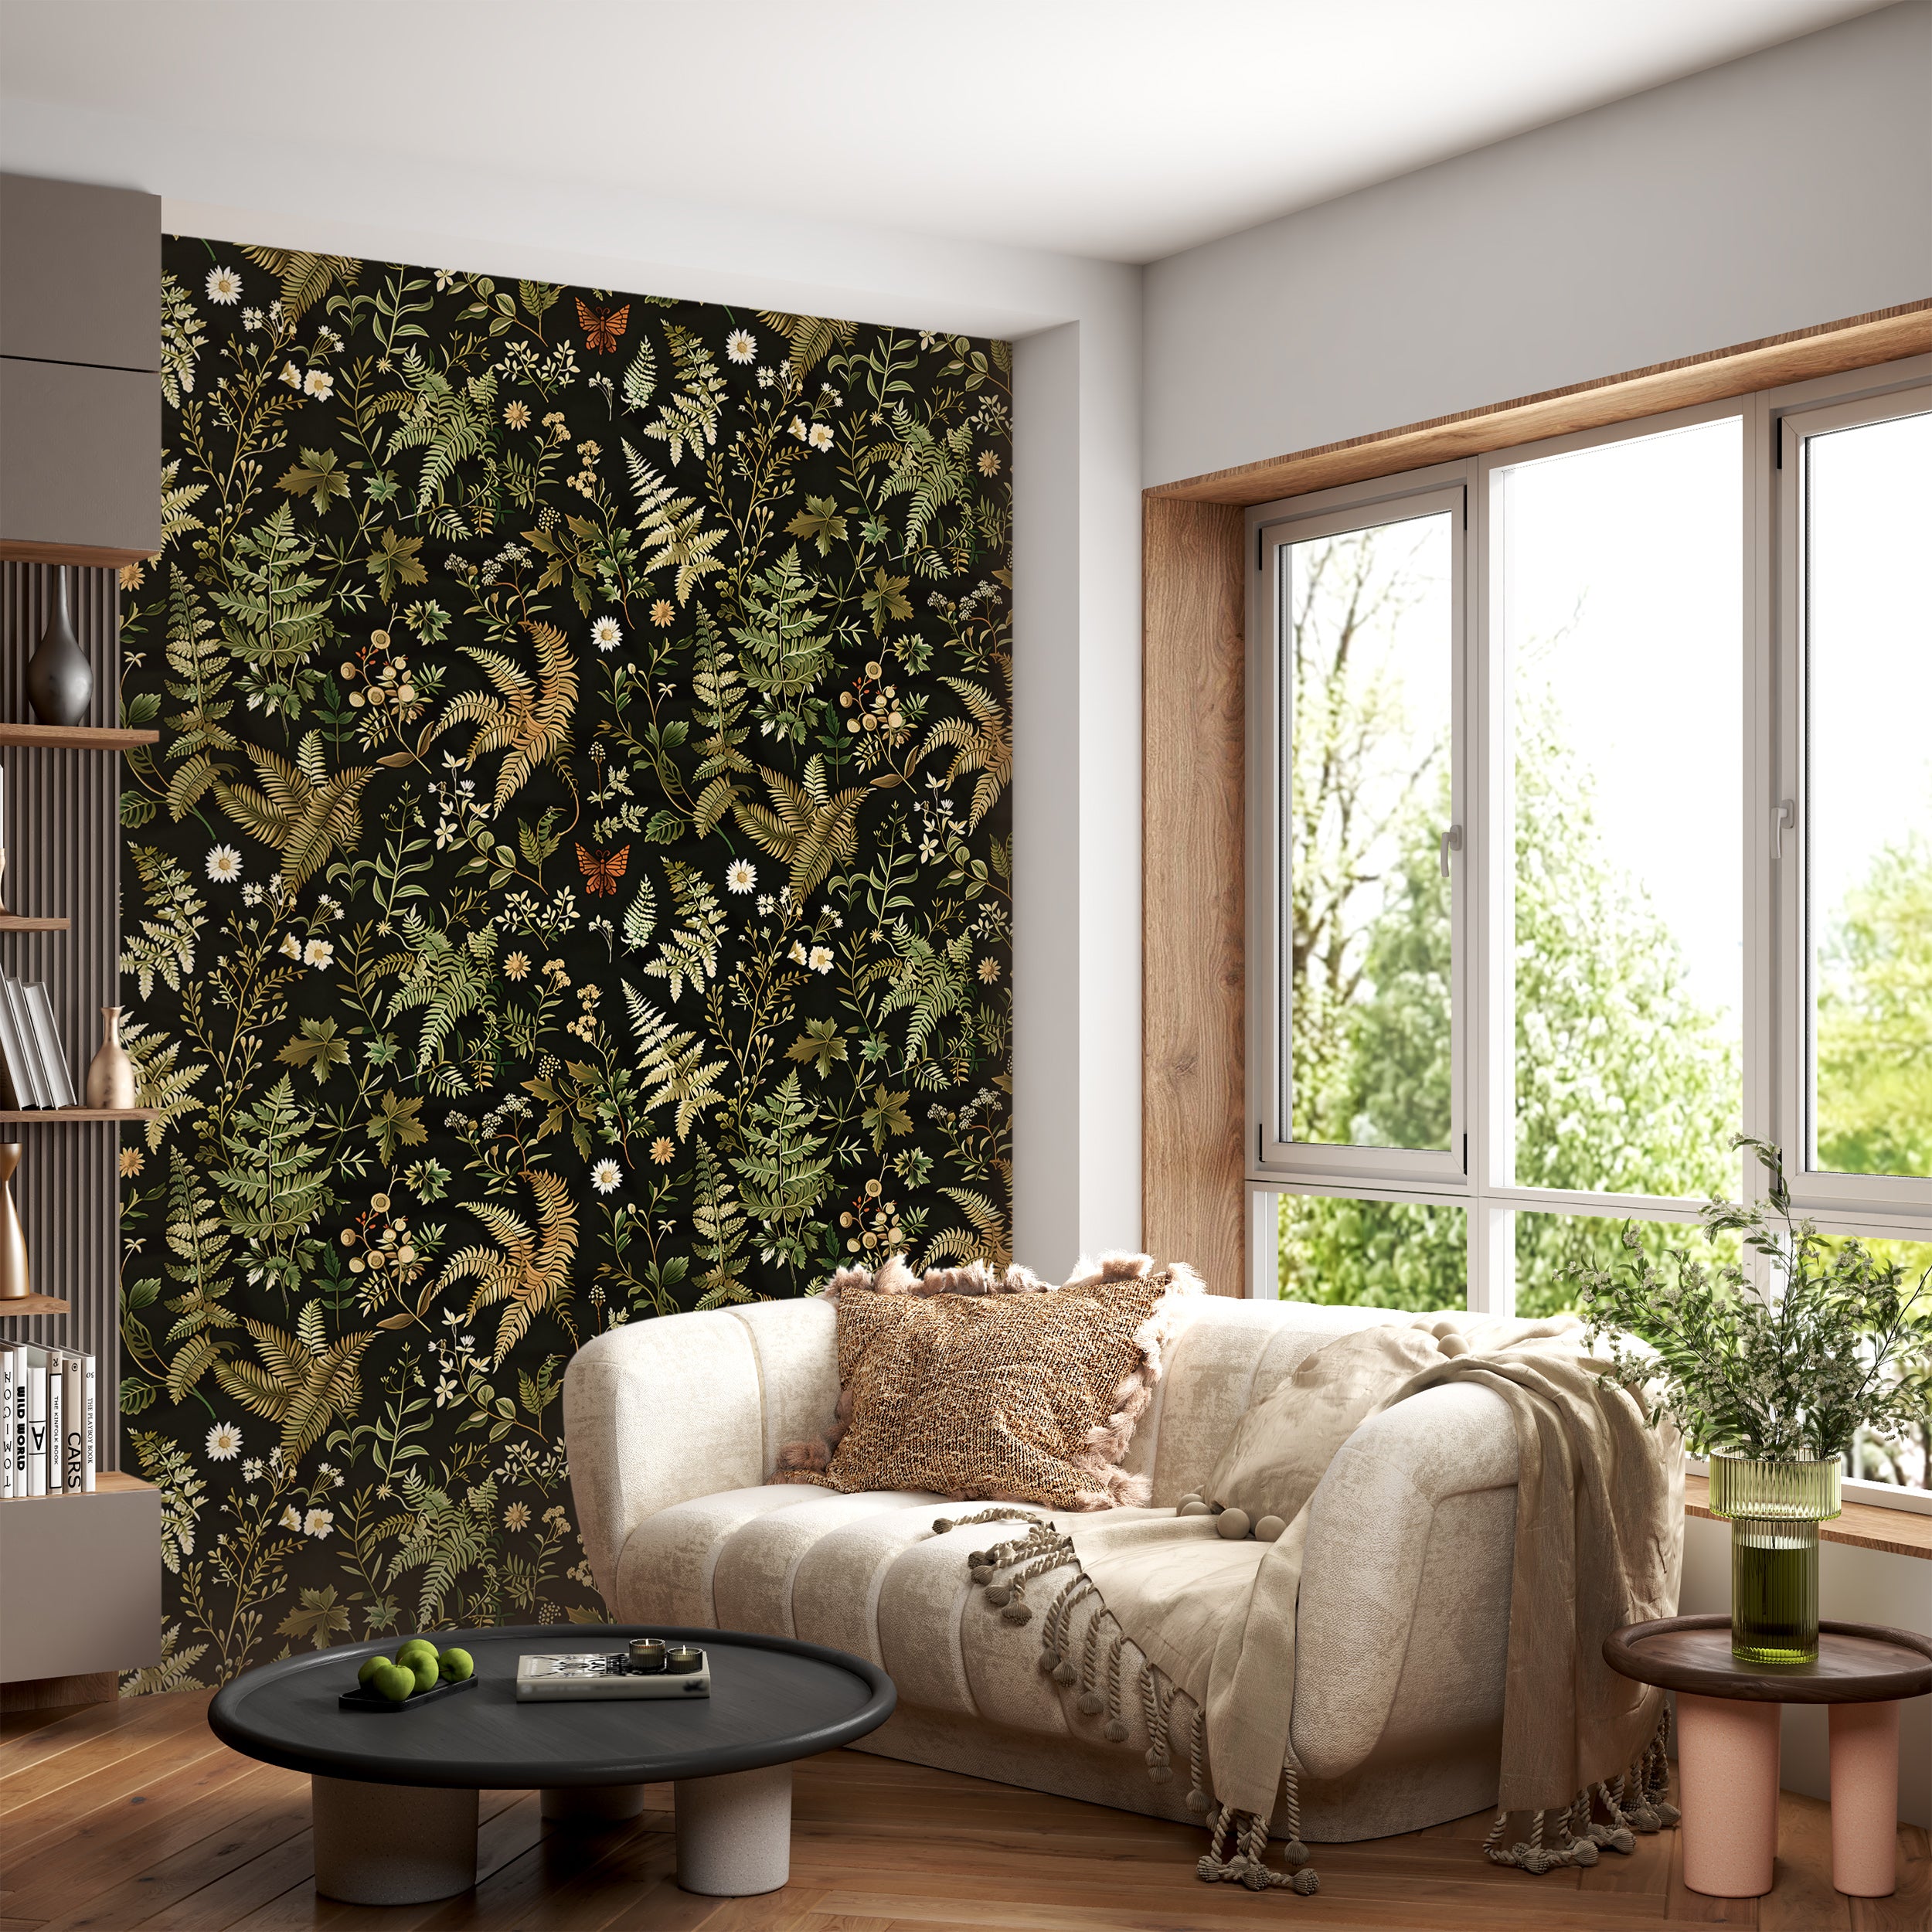 Dark Fern Botanical Pattern Wallpaper, Floral Leaves from Wild Forest Decal, Peel and Stick Removable Greenery Decor, PVC-free Black and Green